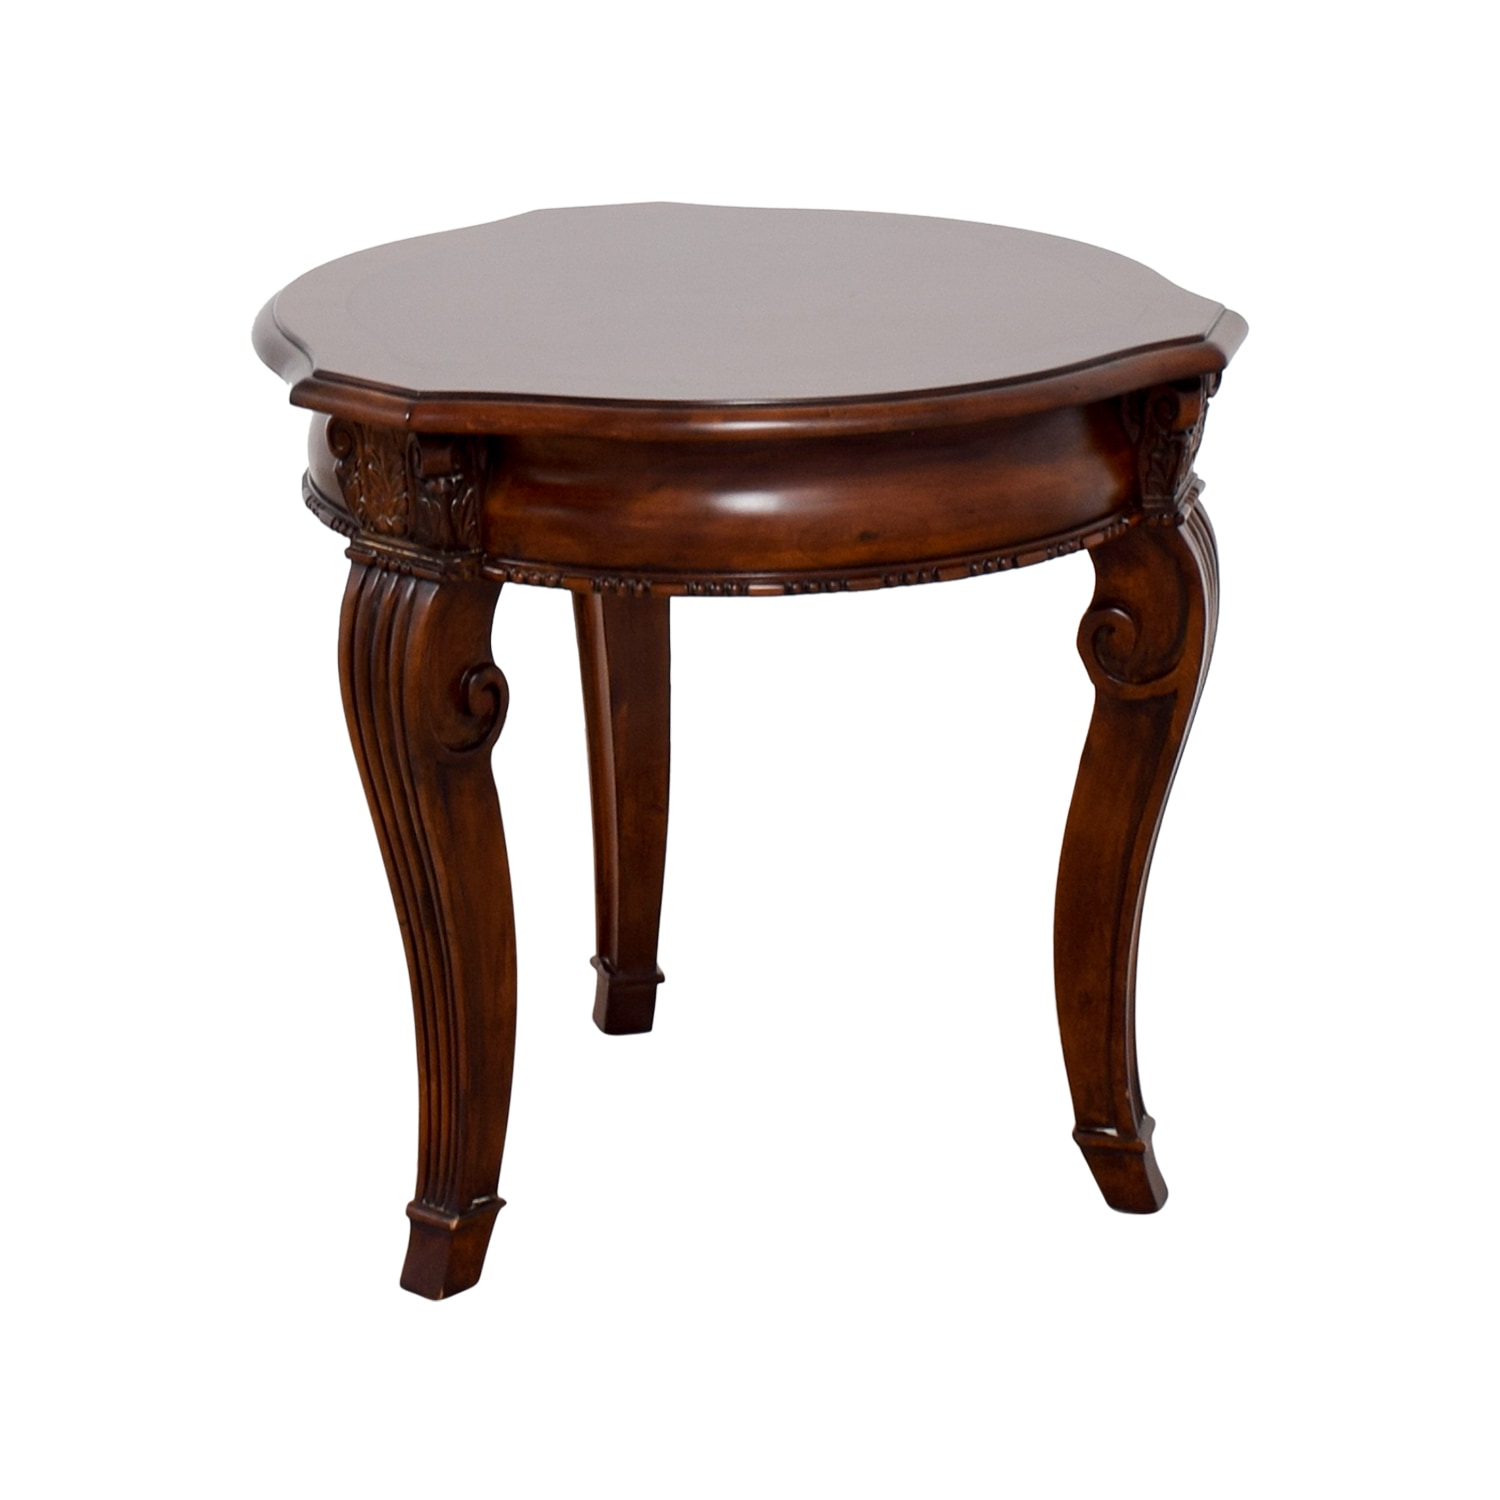 Stanley Furniture Stanley Furniture Round End Table coupon